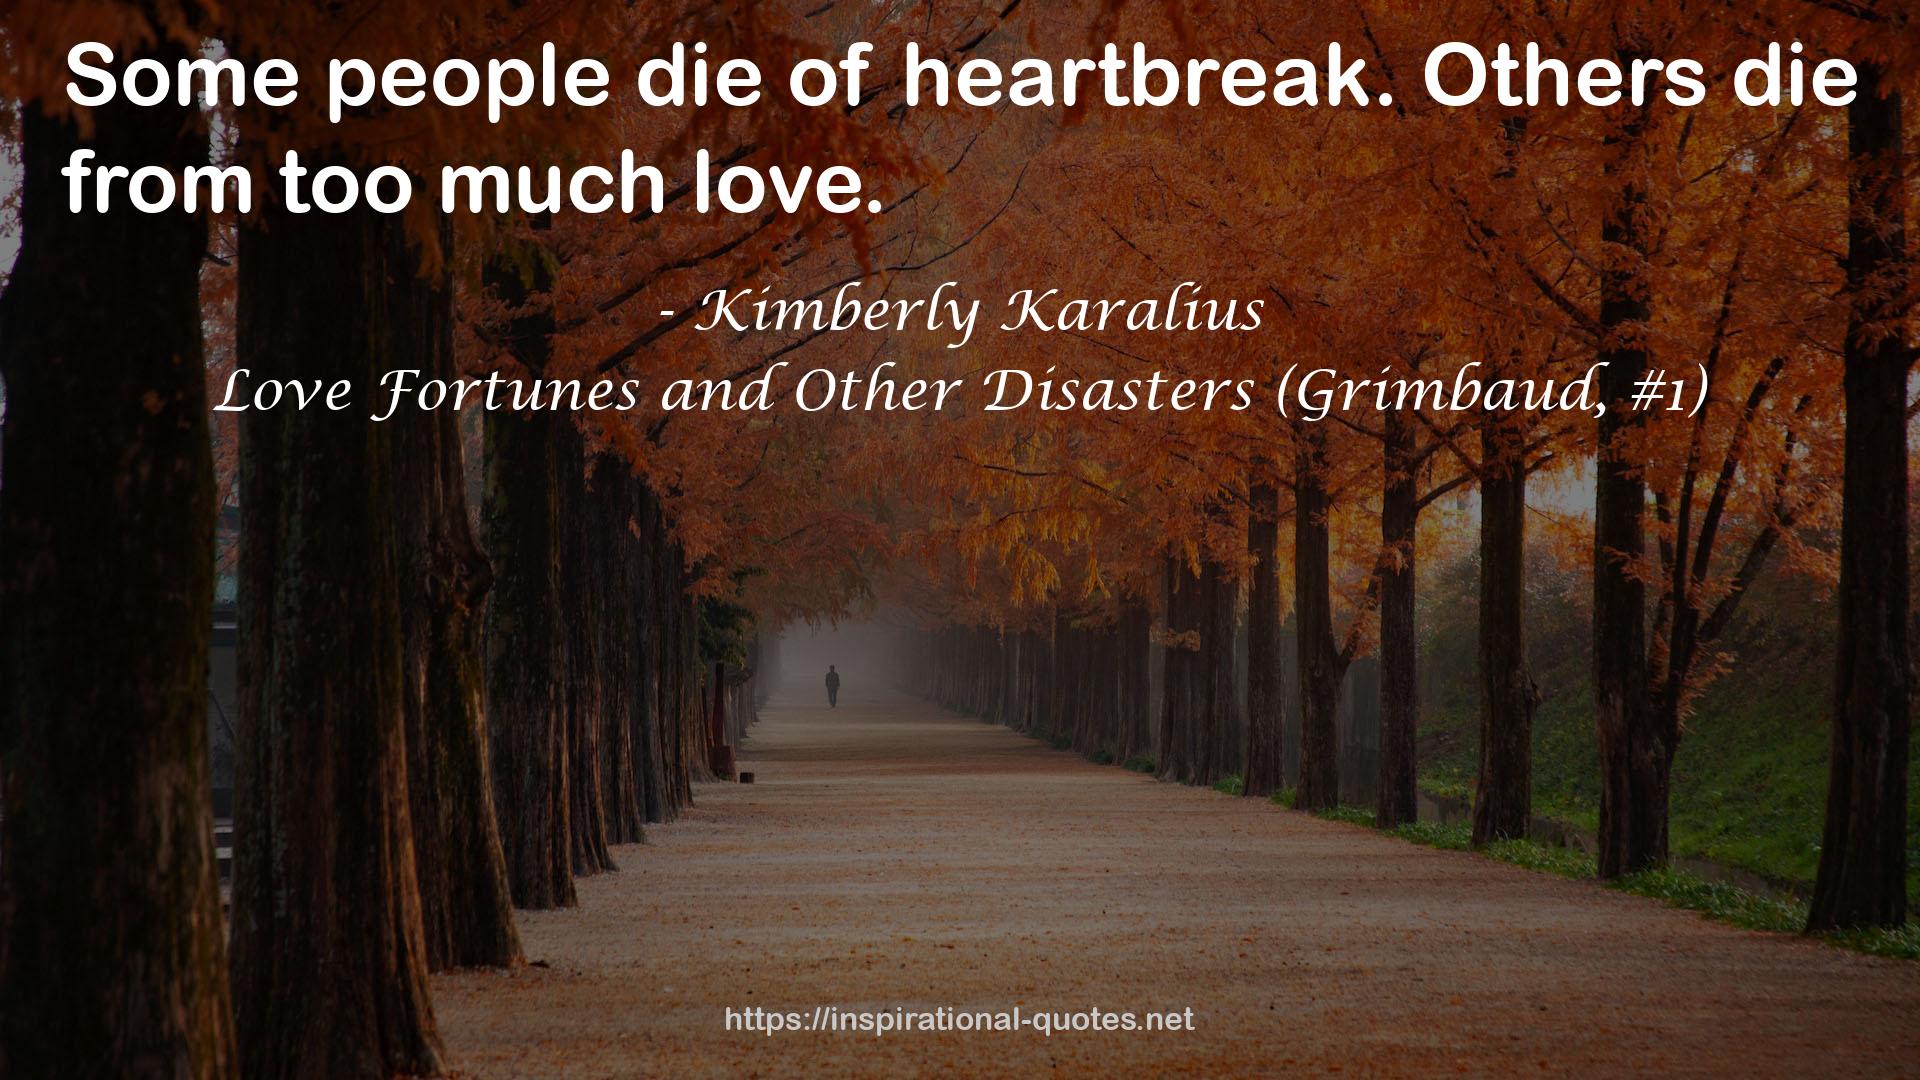 Love Fortunes and Other Disasters (Grimbaud, #1) QUOTES